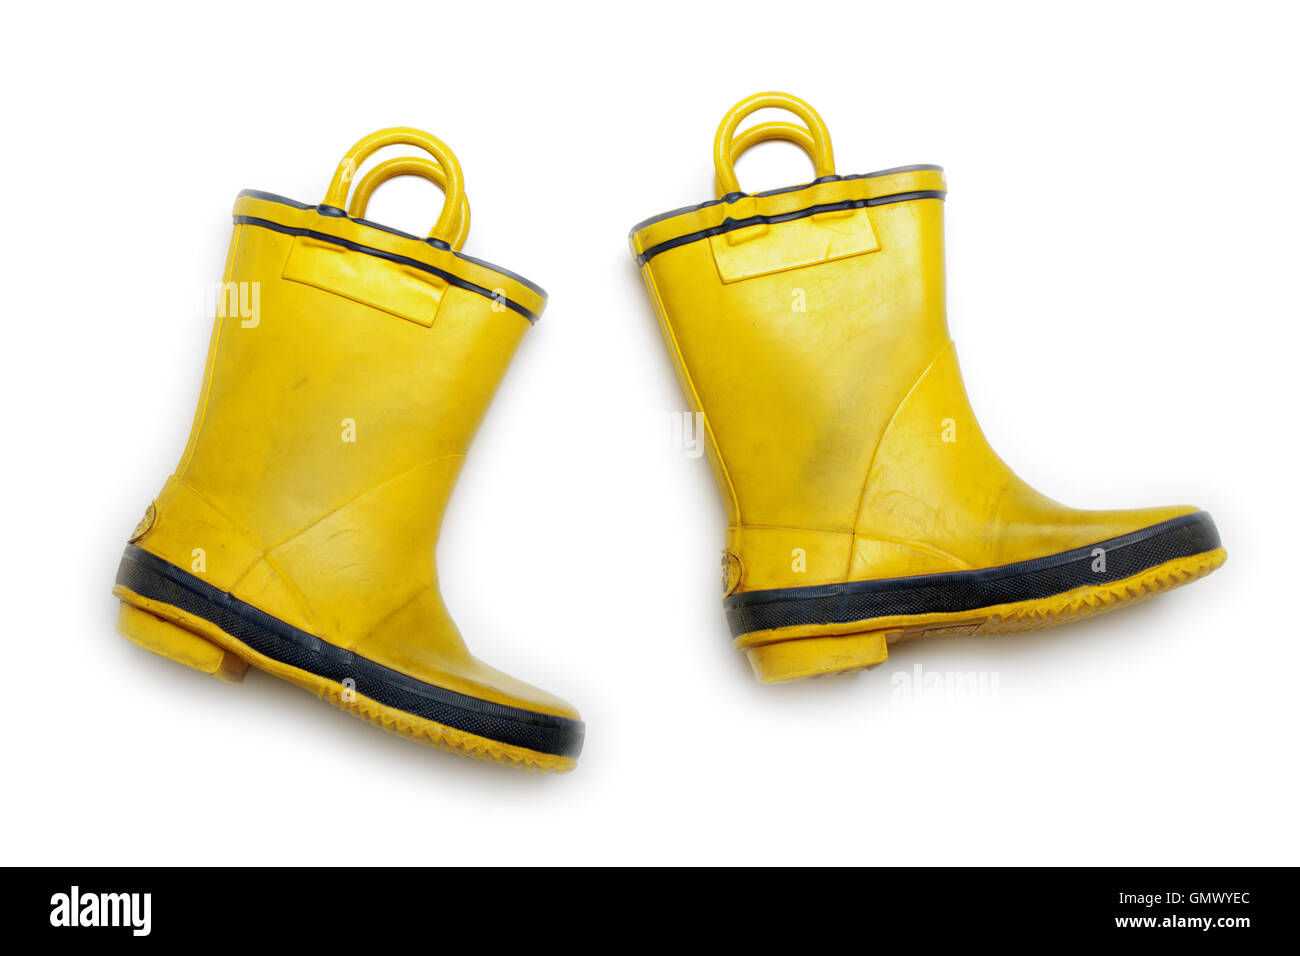 Rubber boot Stock Photo